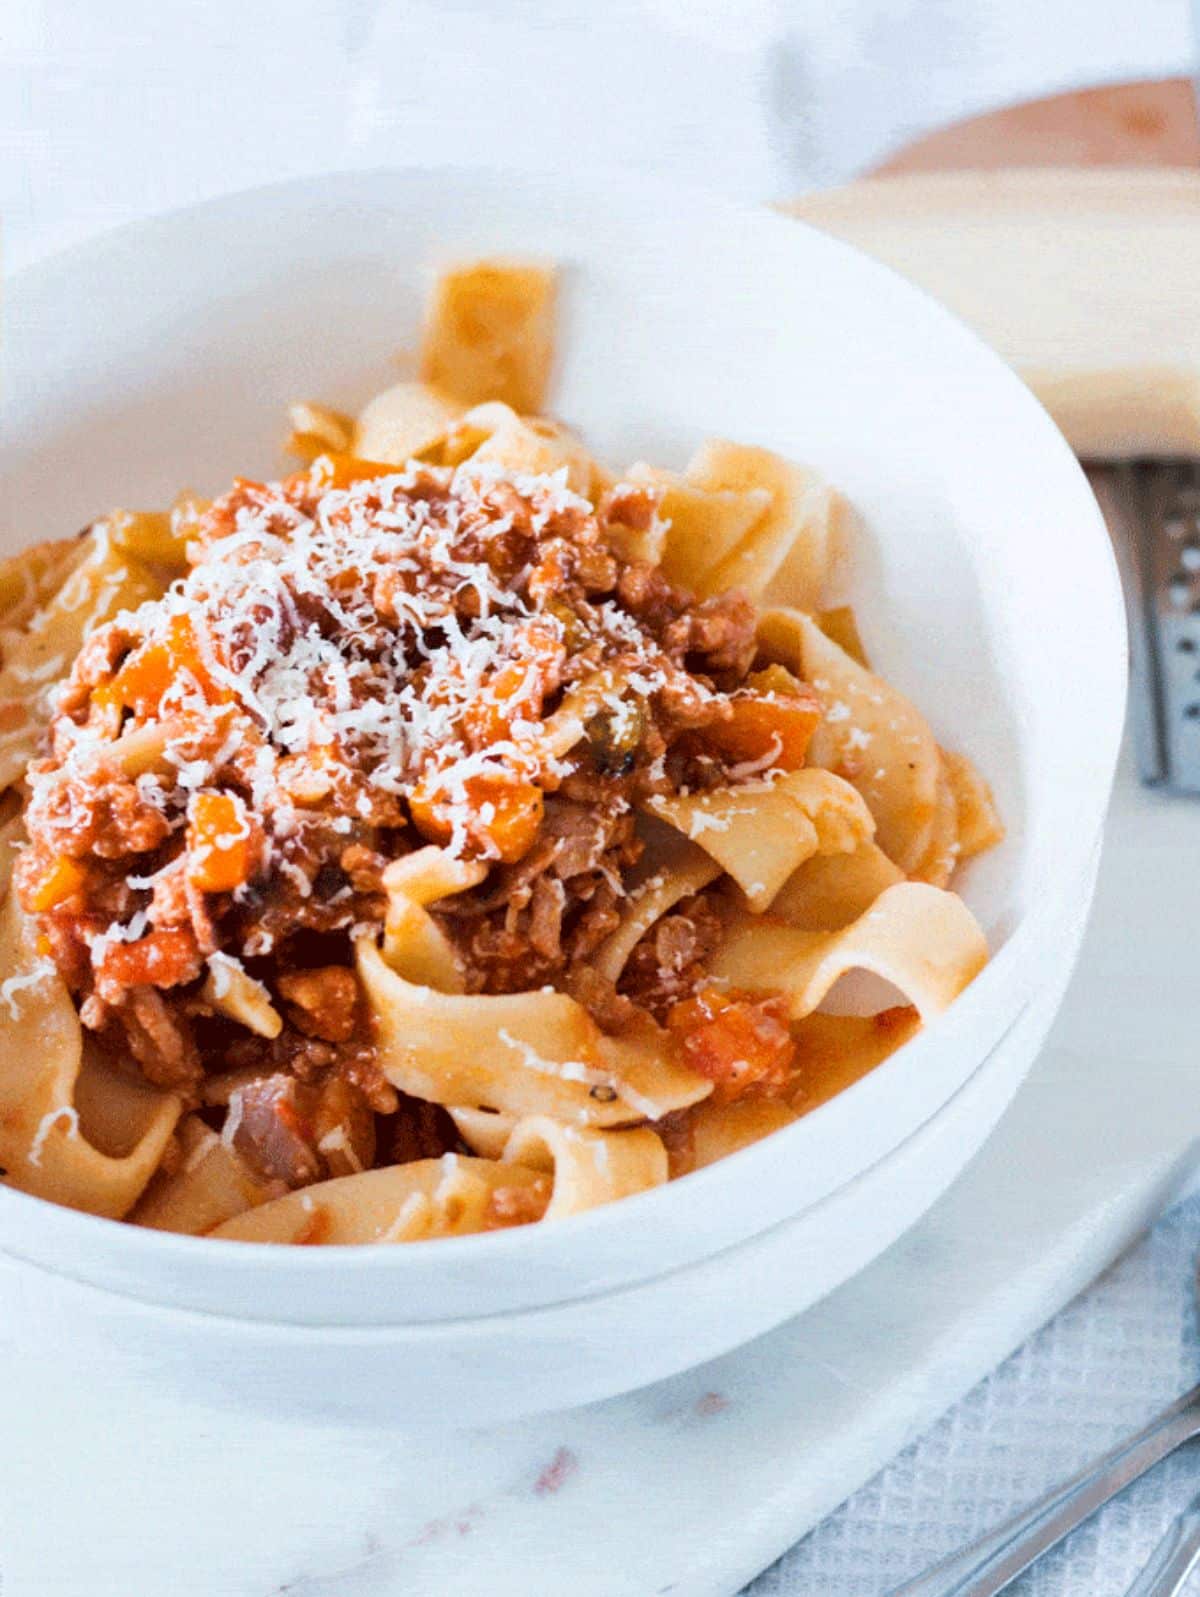 Pork Ragu with sliced cheese on the top in a white bowl.